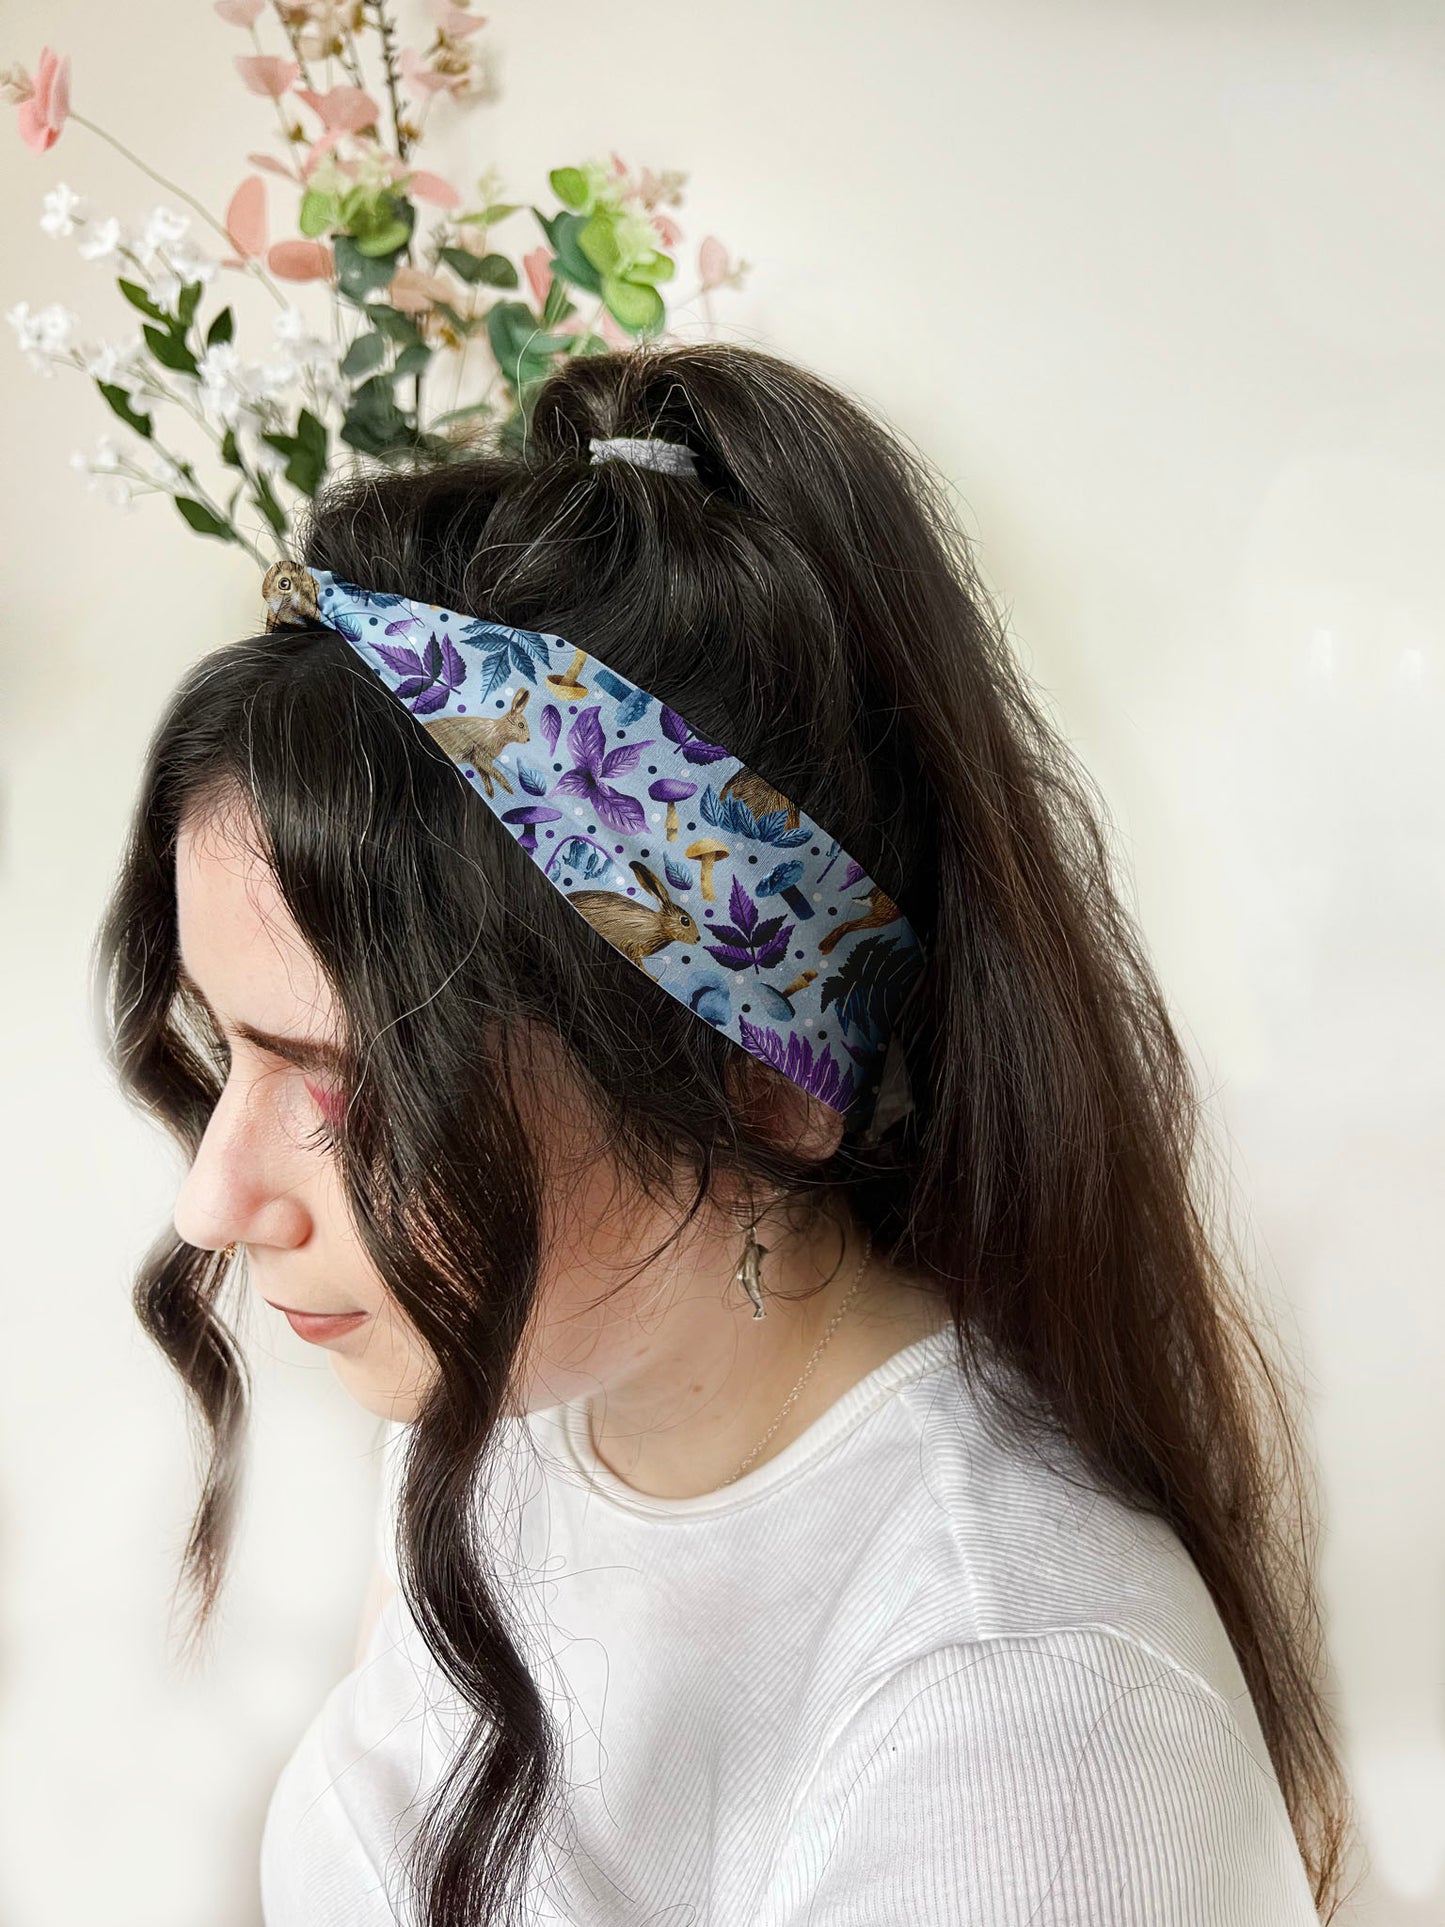 dark haired girl wears headband with hare surface pattern design